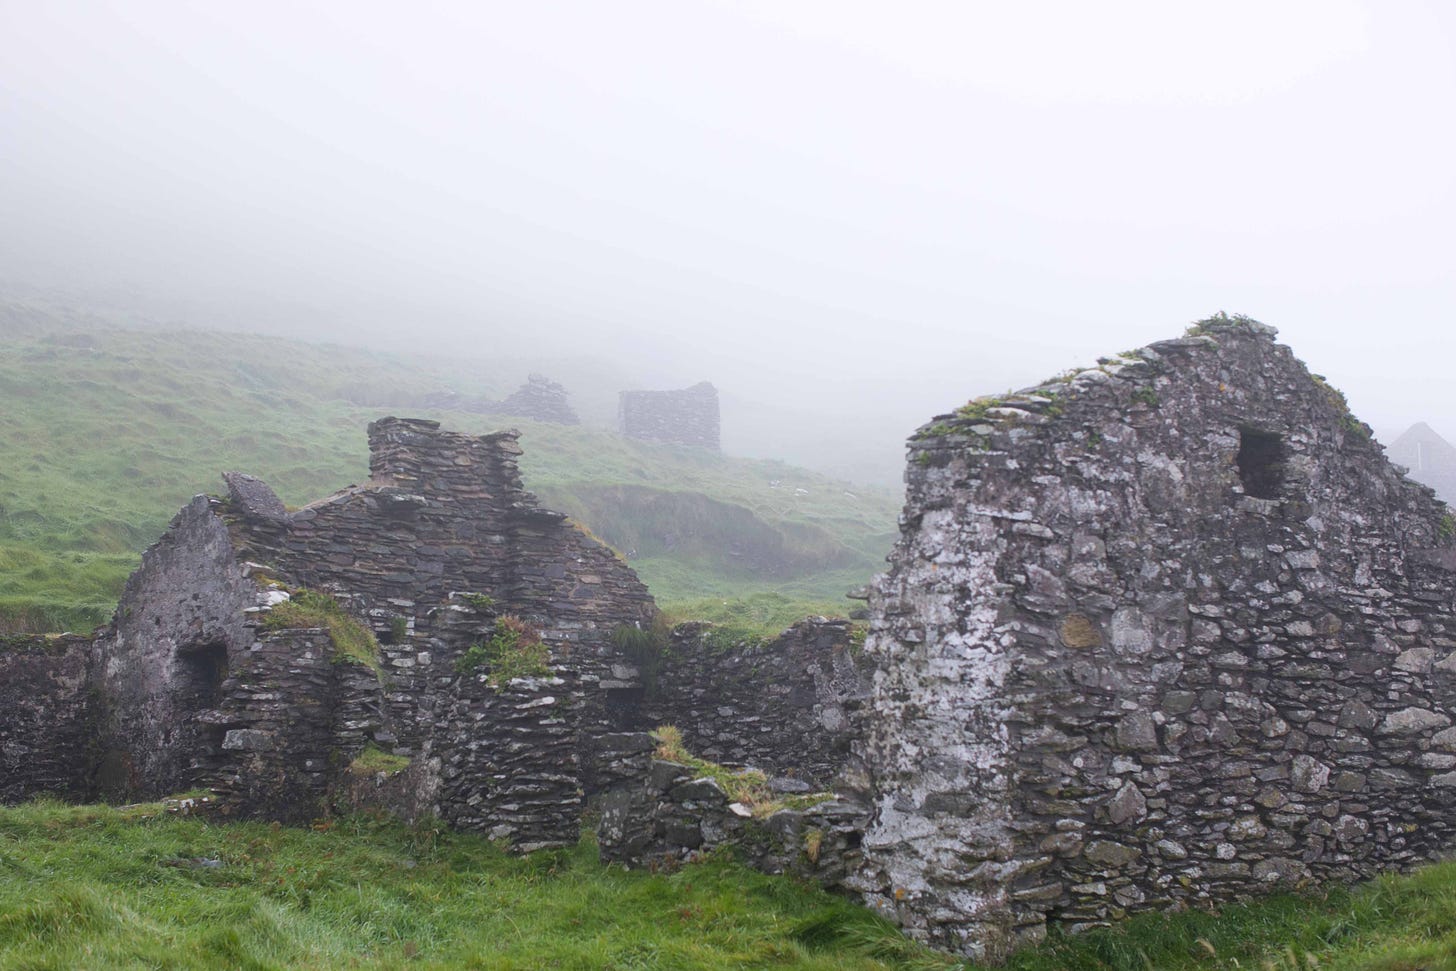 Old ruins of cottages remain on Great Blasket Island, Ireland. These were photographed in fog during September 2020, the first autumn of pandemic.